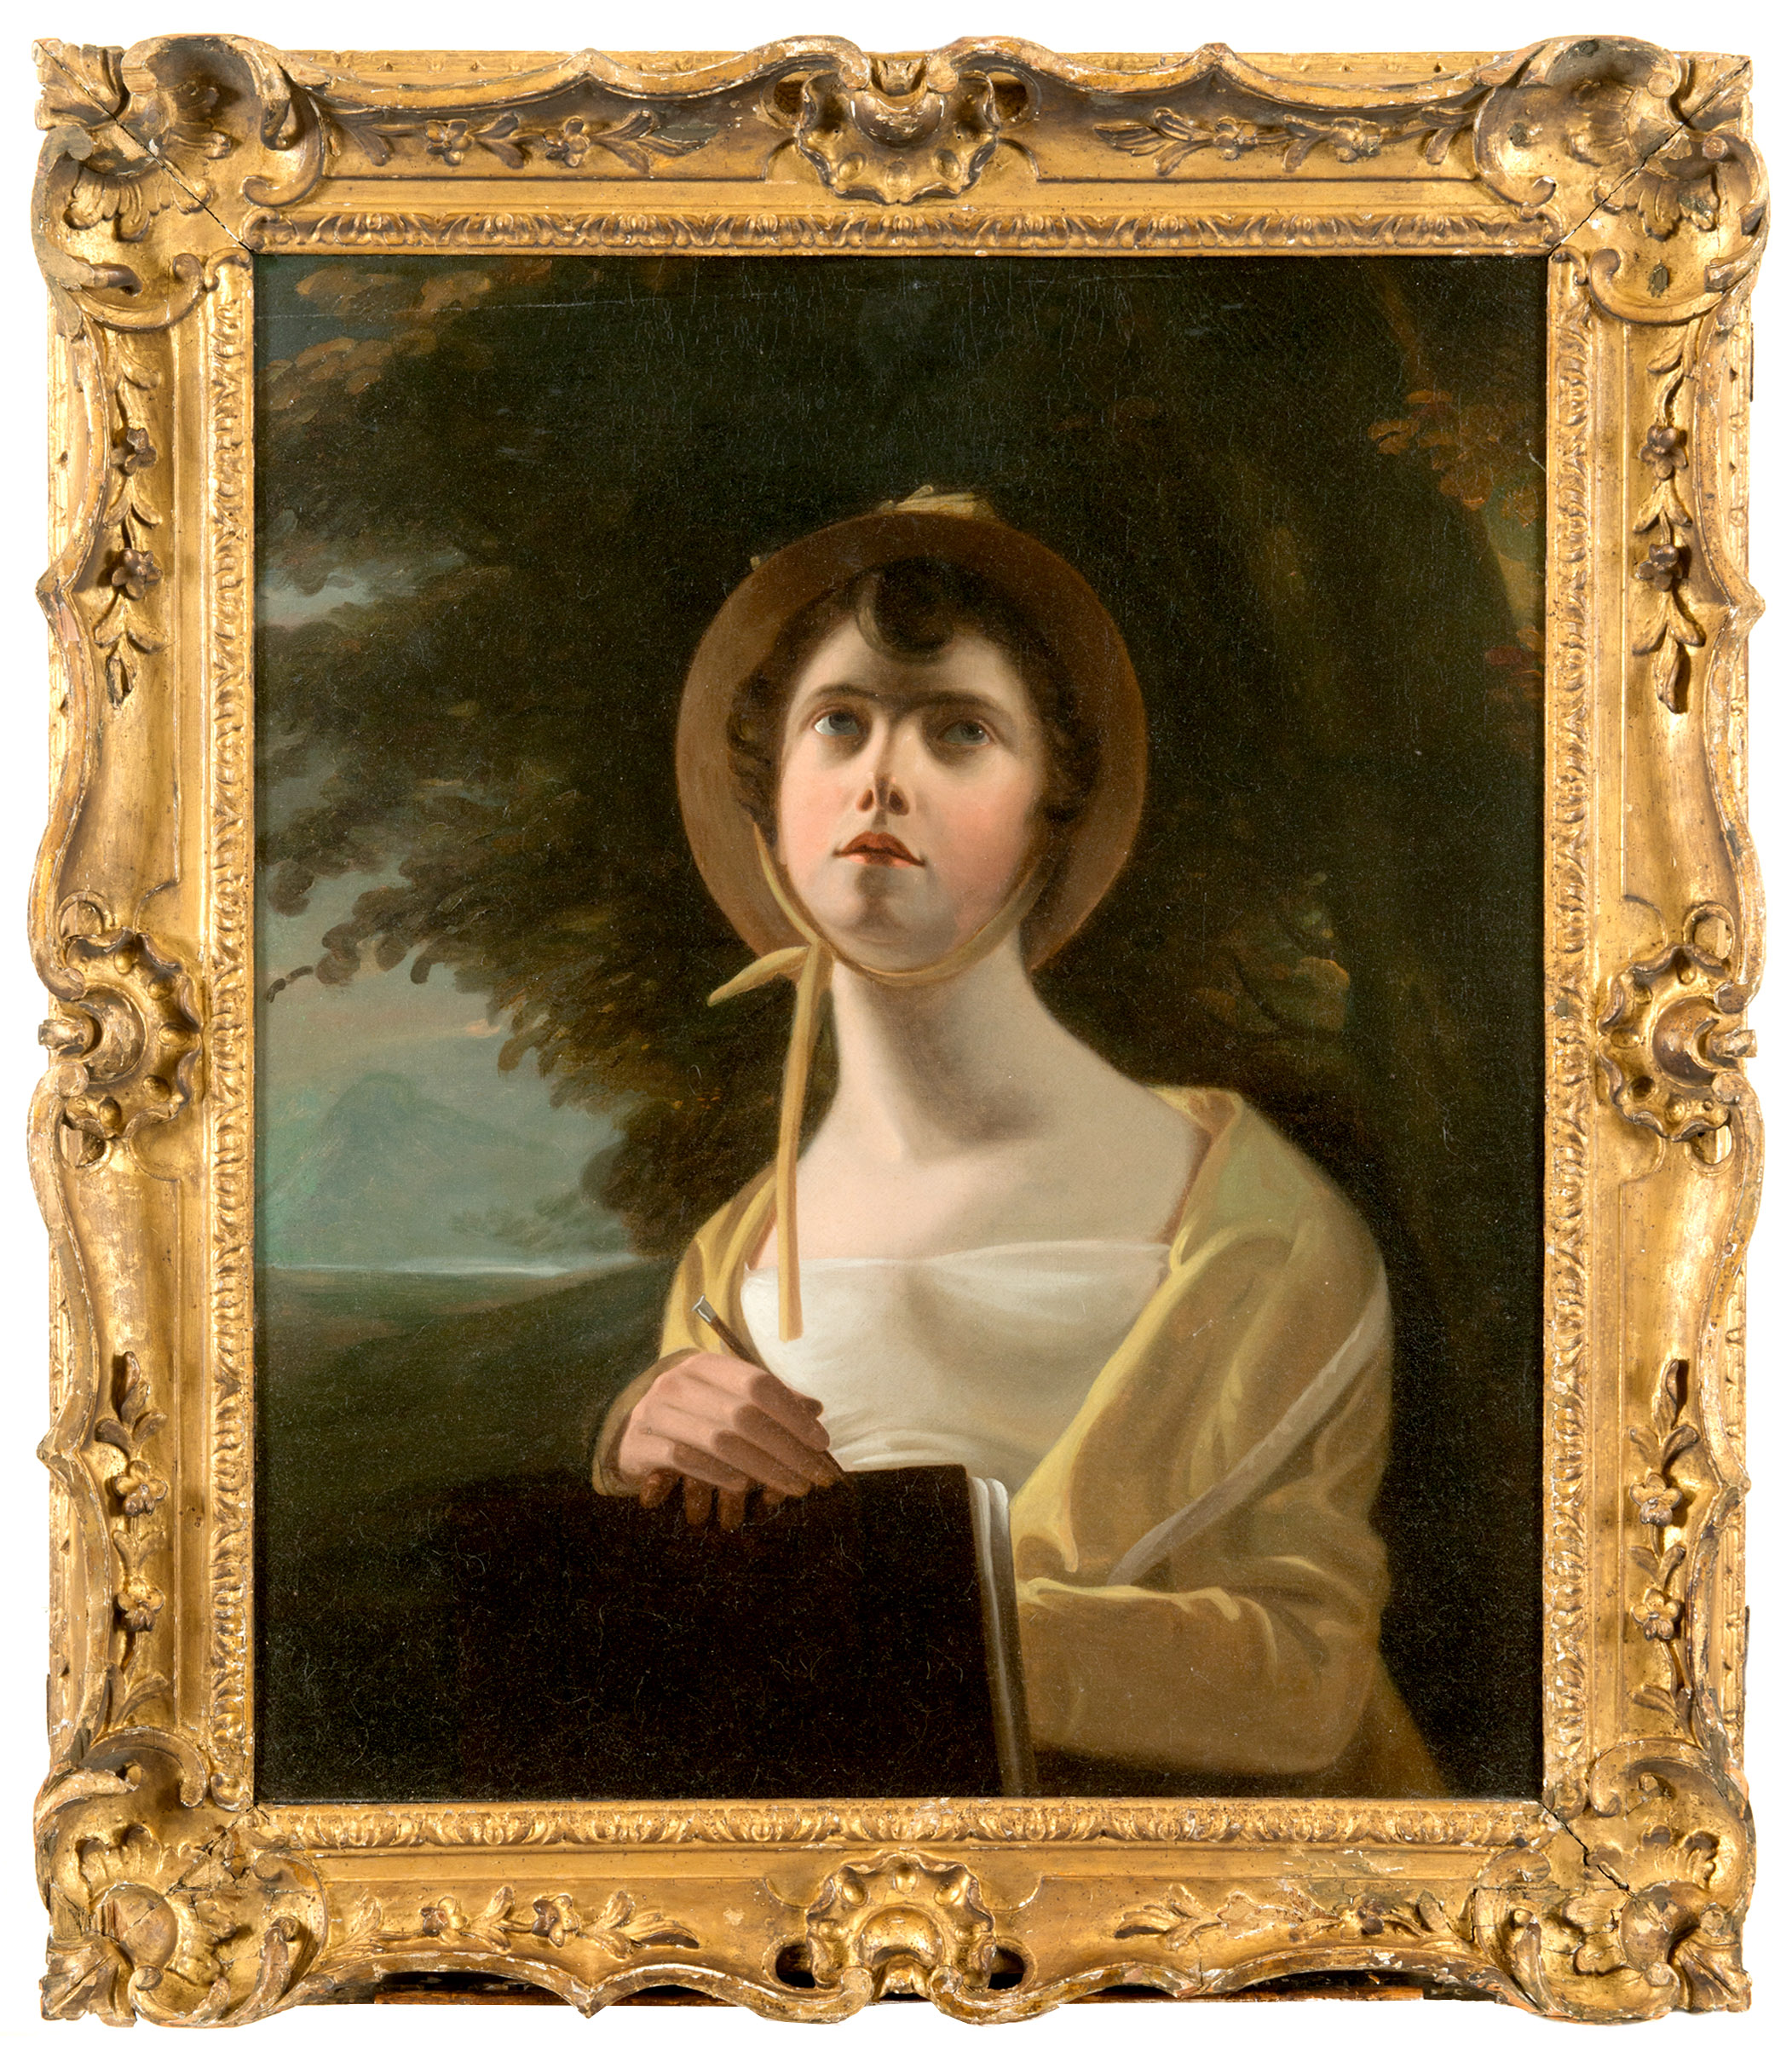 GEORGE WATSON, PRSA (1767-1837) THE LADY ARTIST, POSSIBLY A PORTRAIT OF PEGGY SIMPSON Oil on canvas,